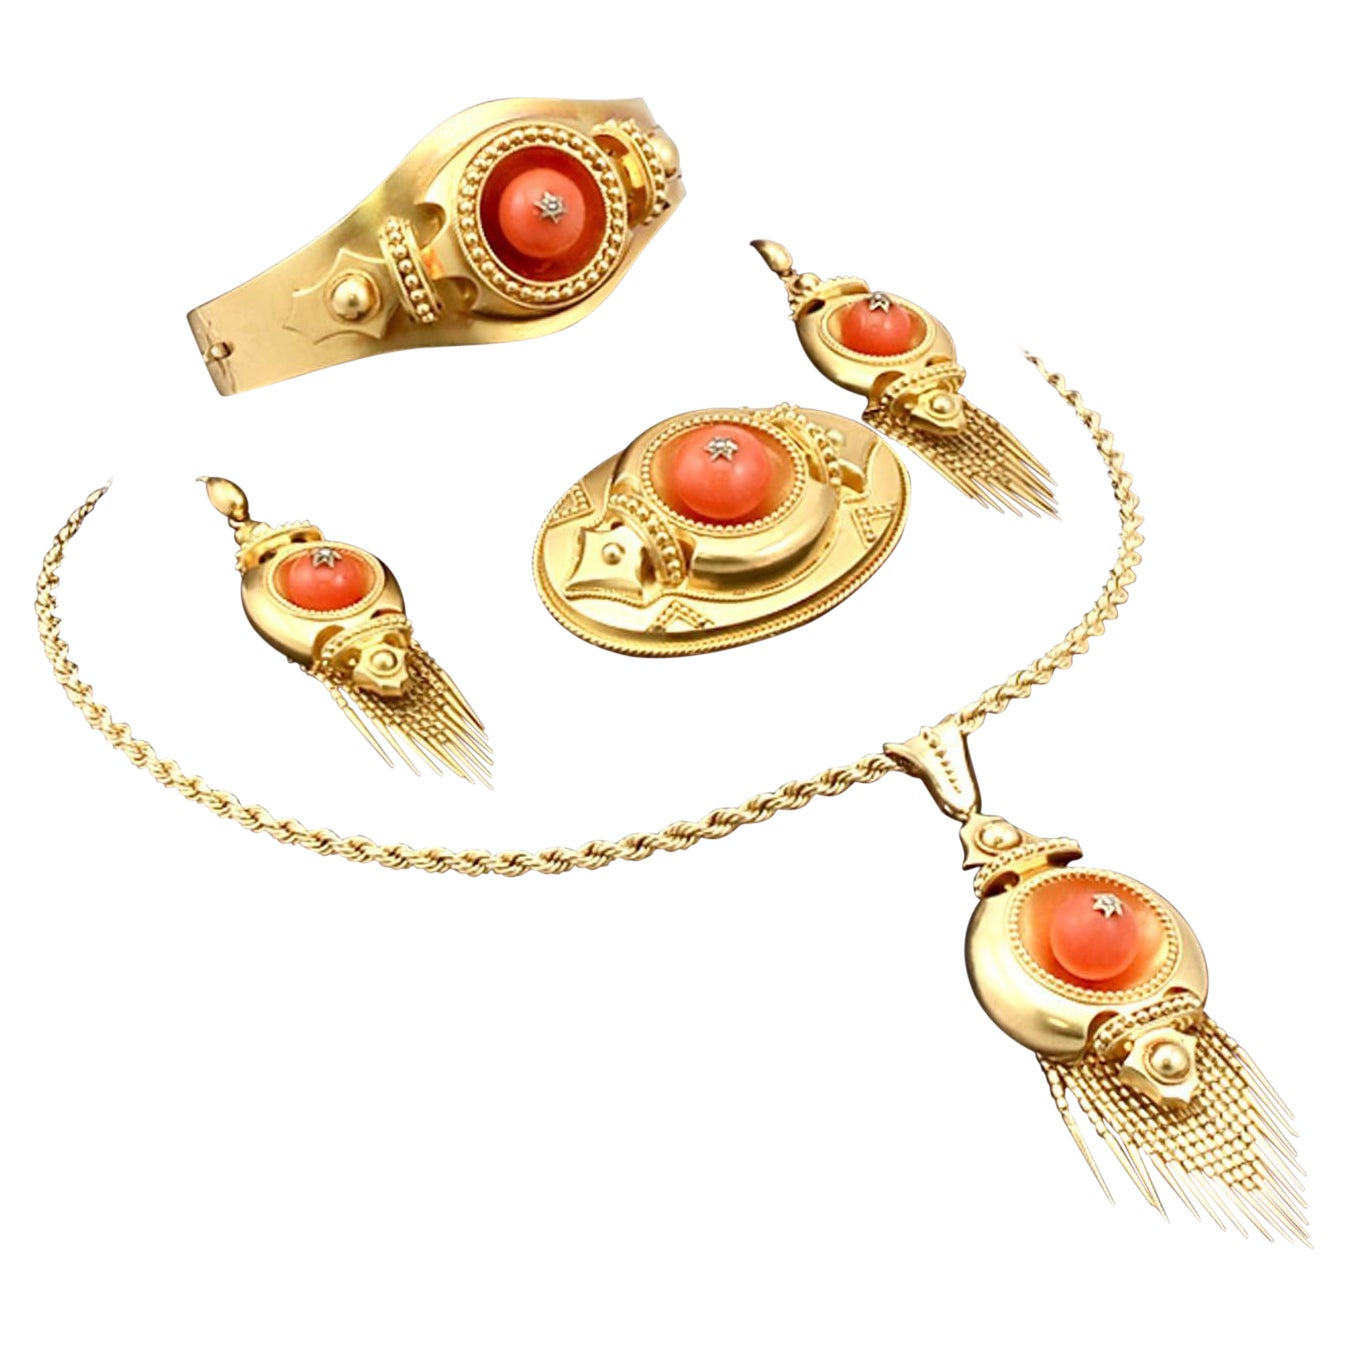 A stunning, fine and impressive antique Victorian 22 karat yellow gold, 20.25 carat coral and 0.05 carat diamond jewelry set (necklace, bangle, brooch and earrings); part of our antique jewelry and estate jewelry collections.

This stunning antique